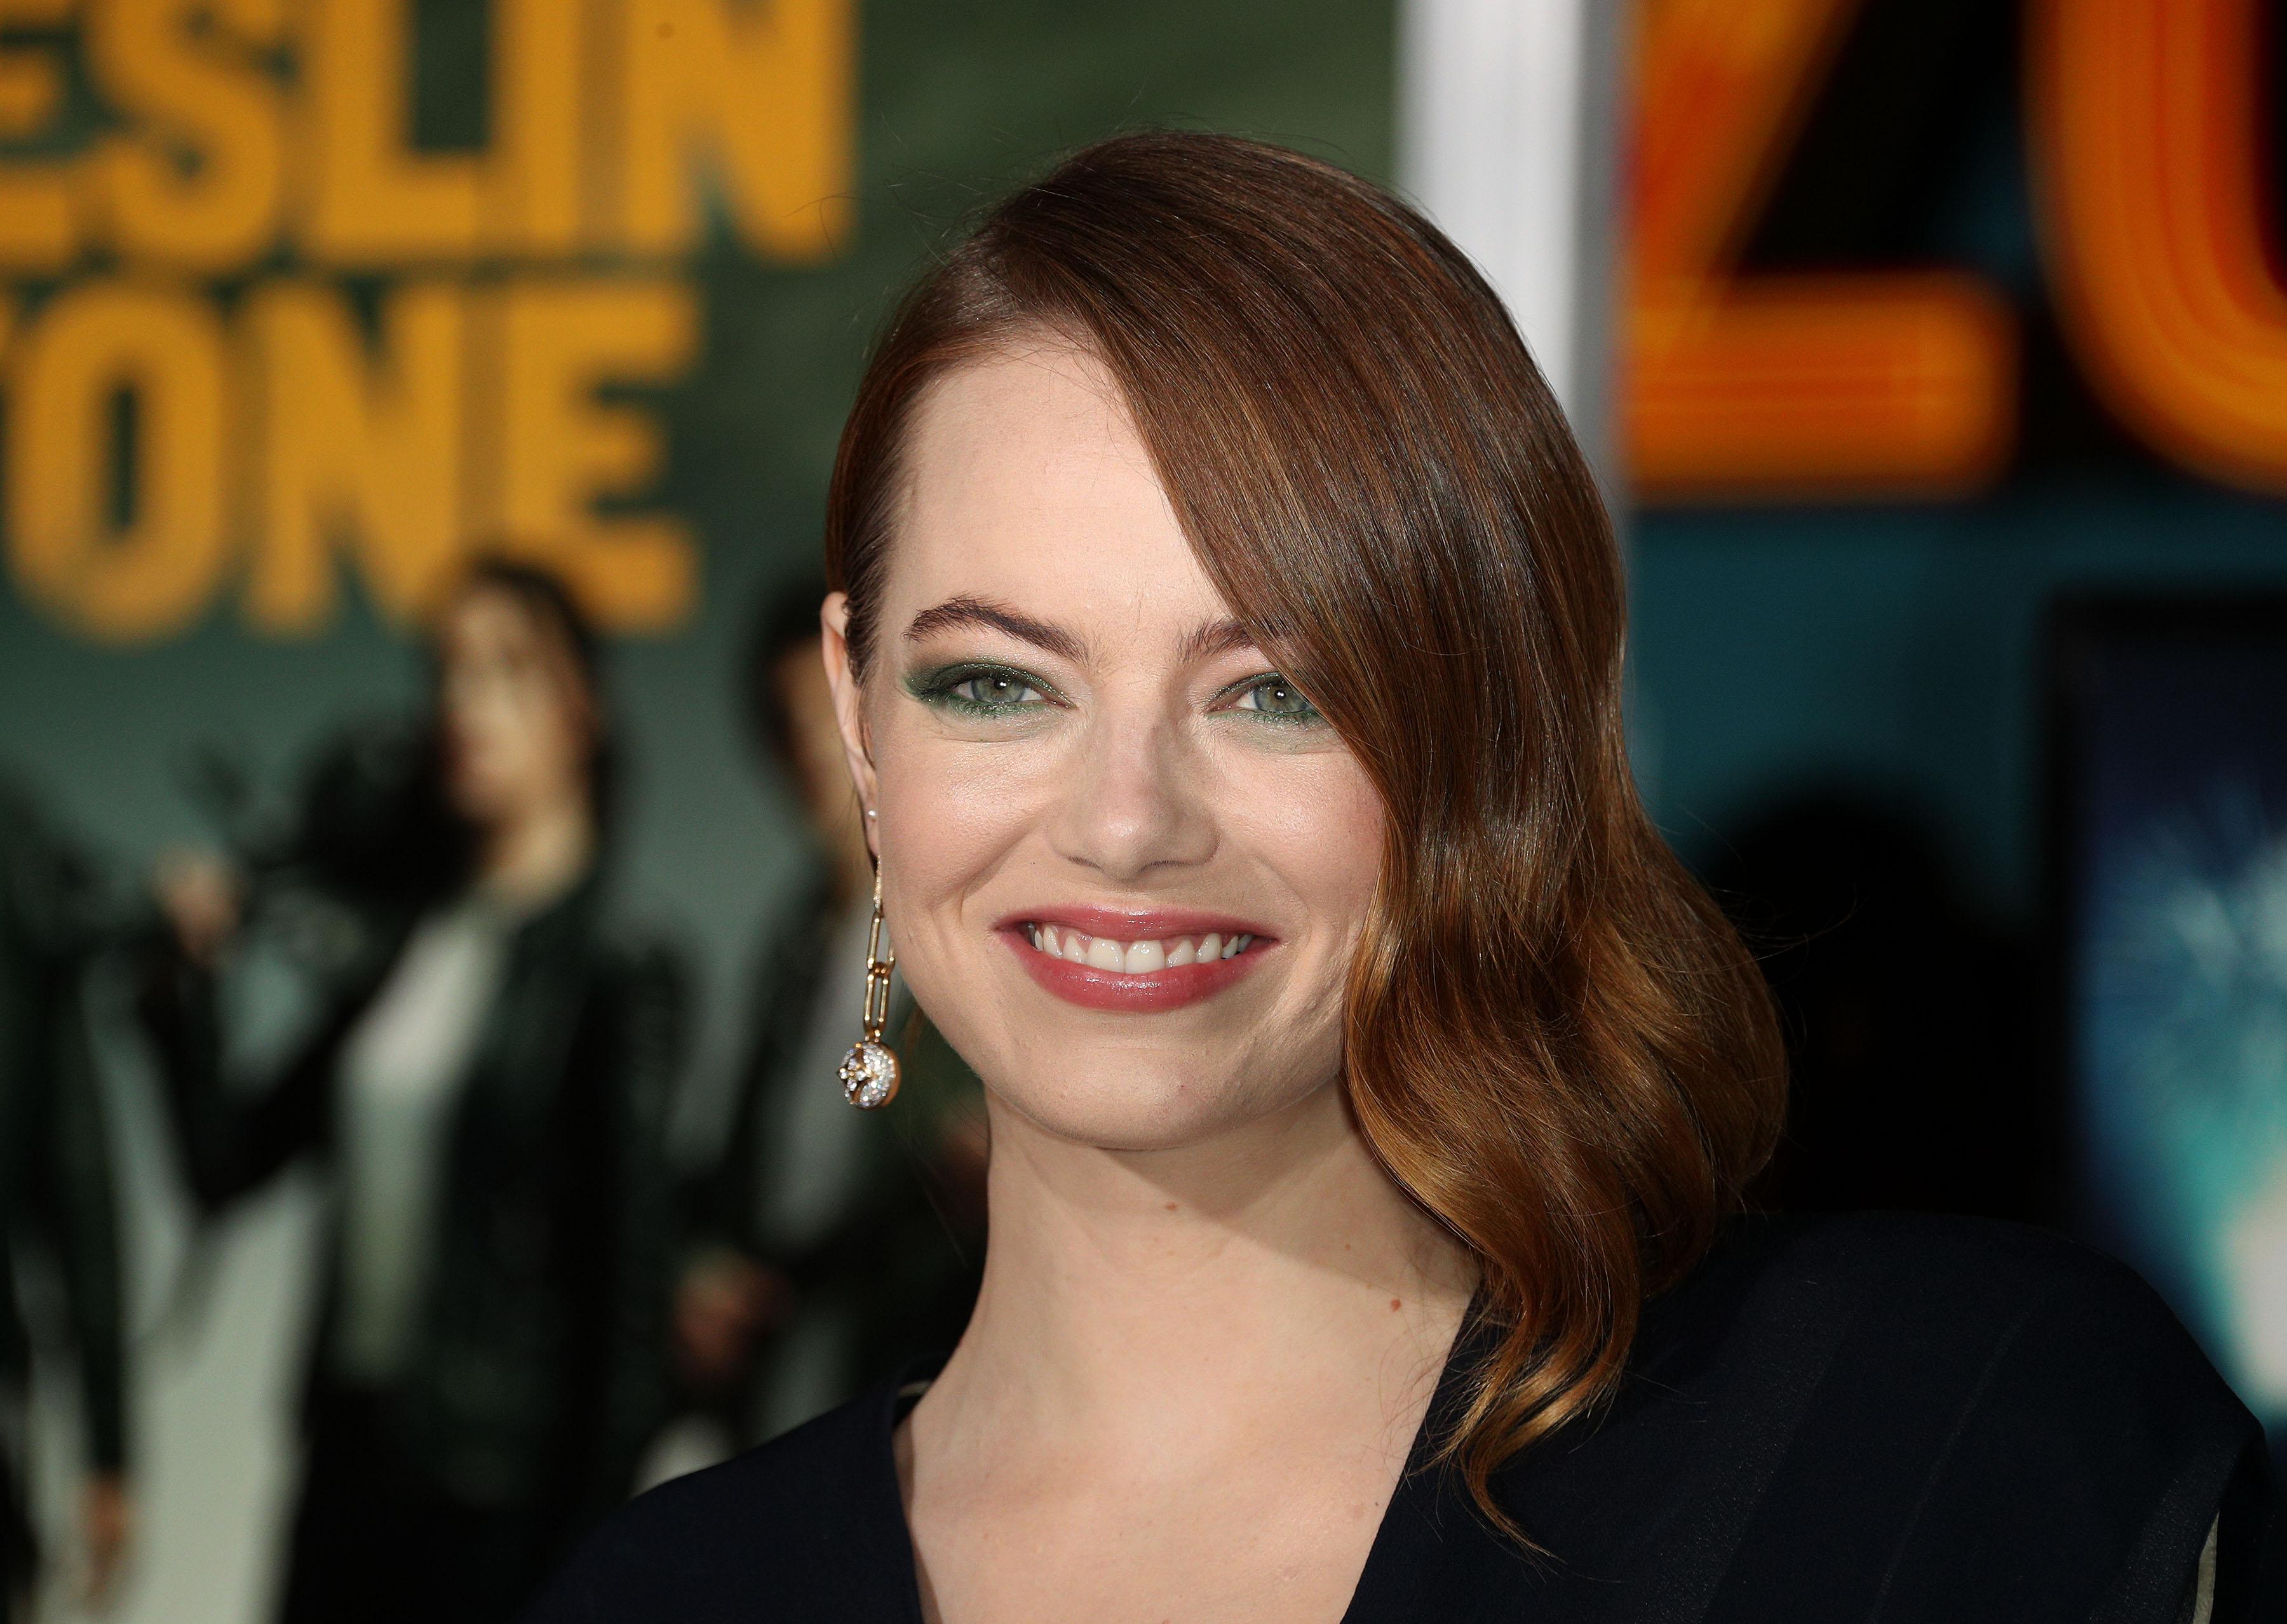 Emma Stone and husband Dave McCary producing movie together